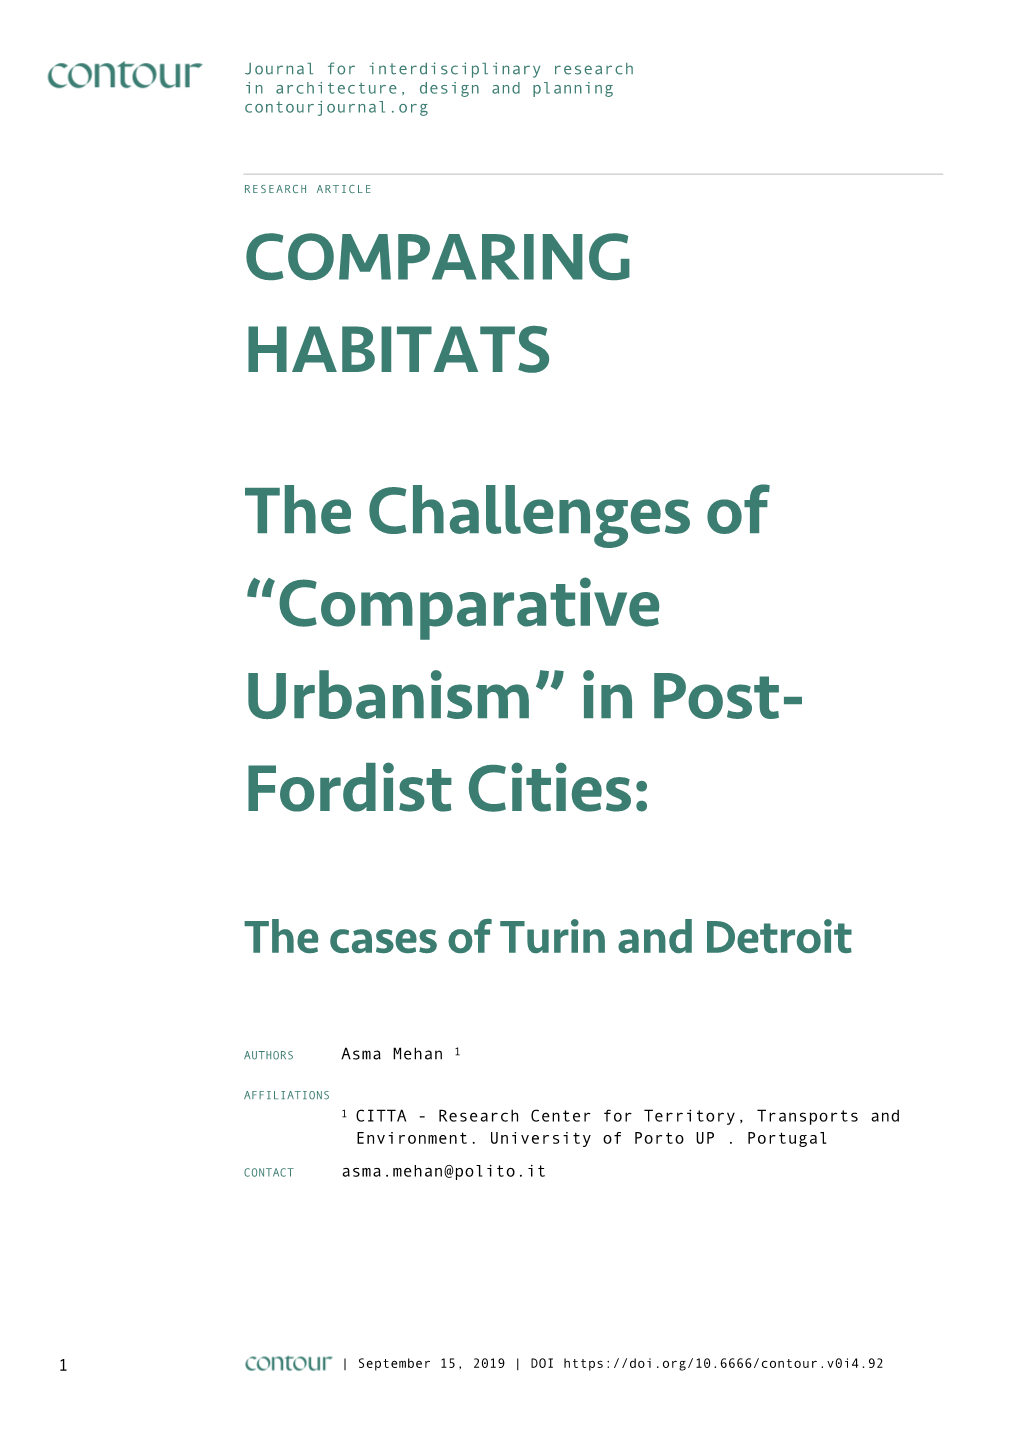 “Comparative Urbanism” in Post- Fordist Cities